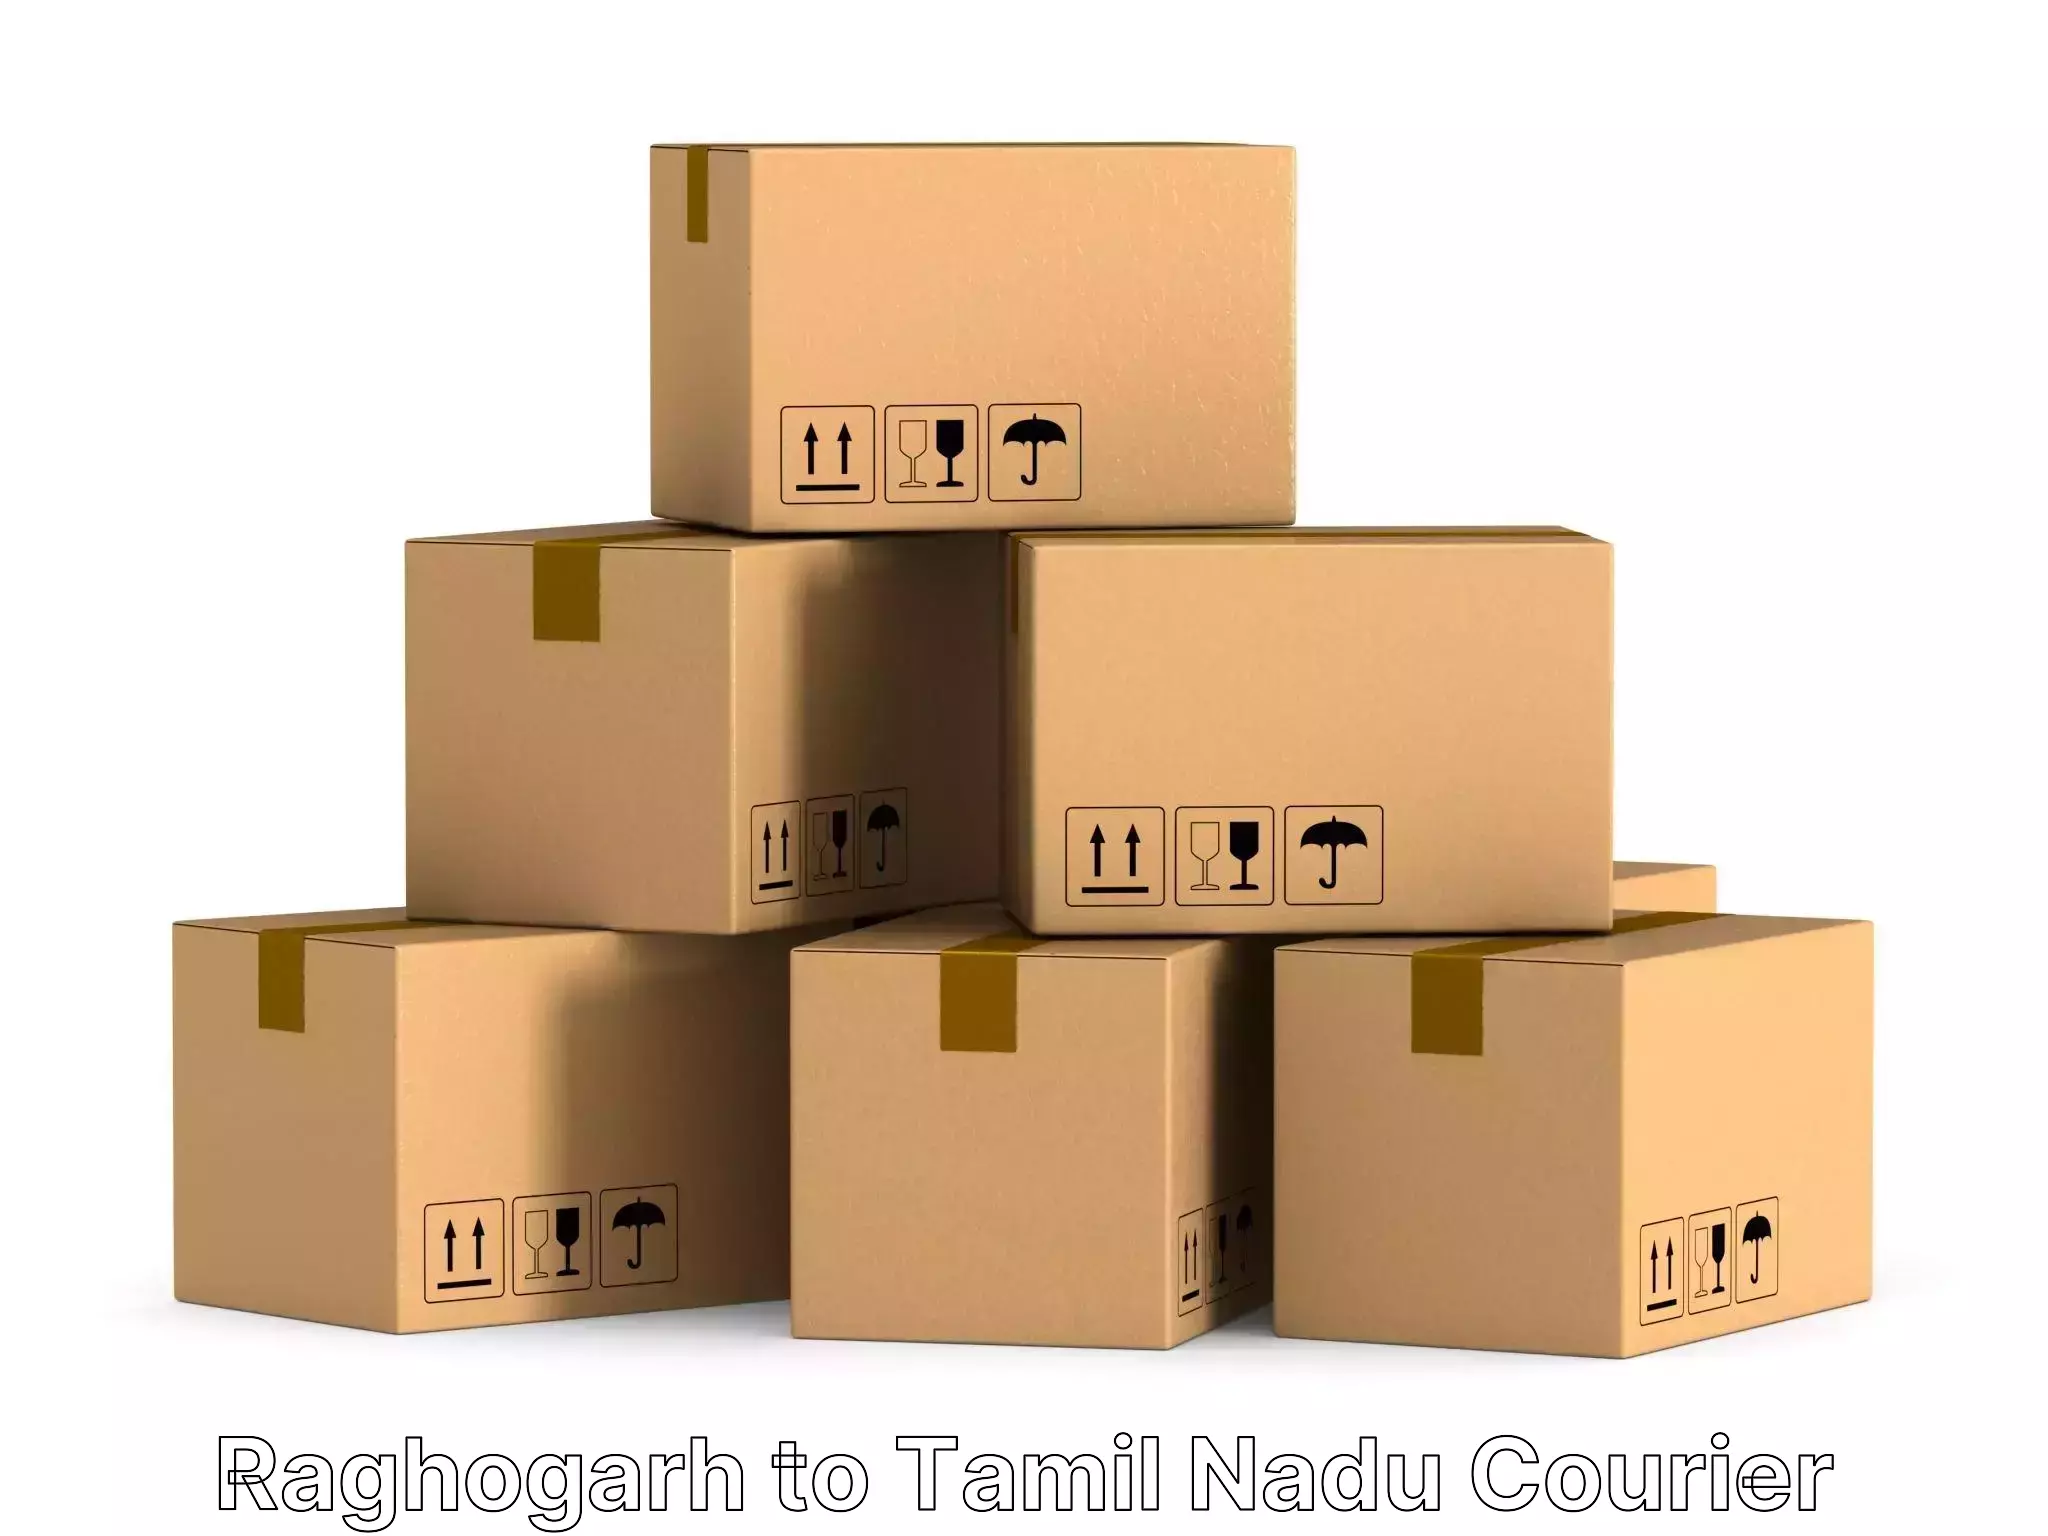 Home relocation experts Raghogarh to Thanjavur